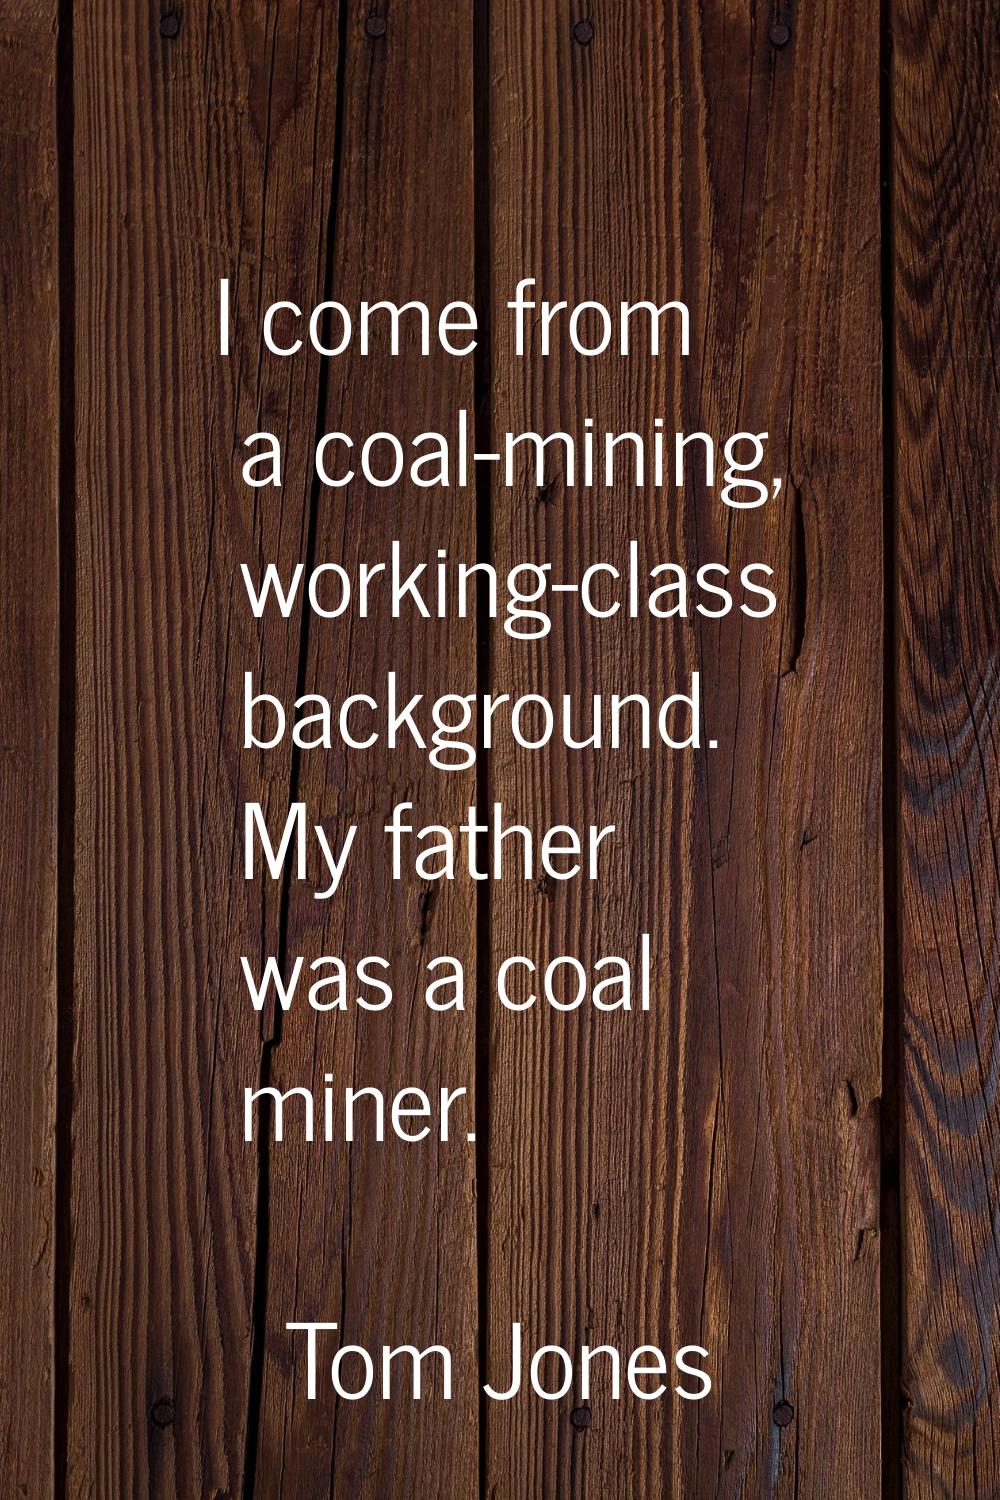 I come from a coal-mining, working-class background. My father was a coal miner.